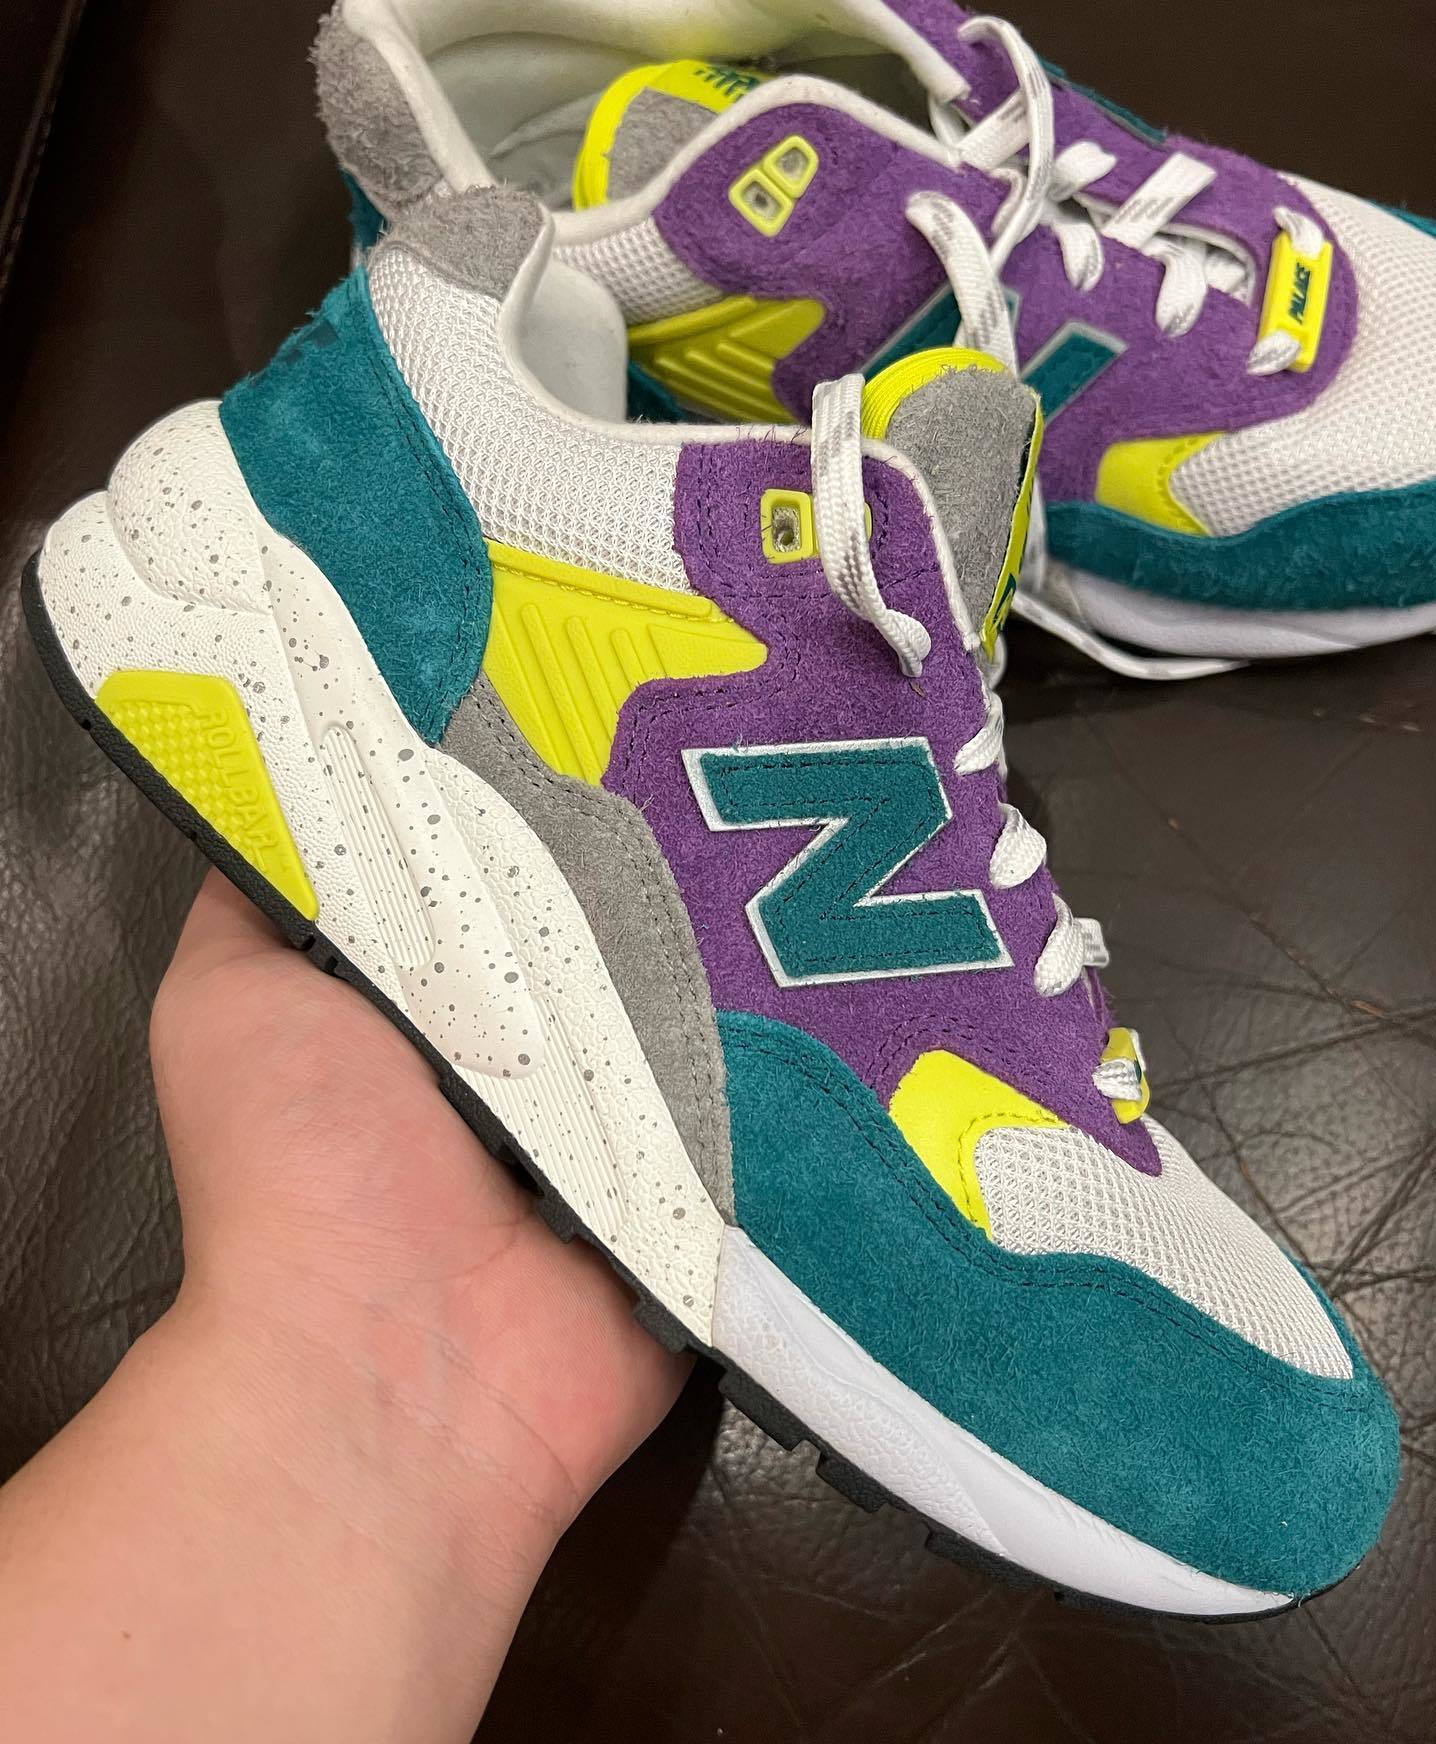 First Look at the Palace x New Balance MT580 Collab | Complex